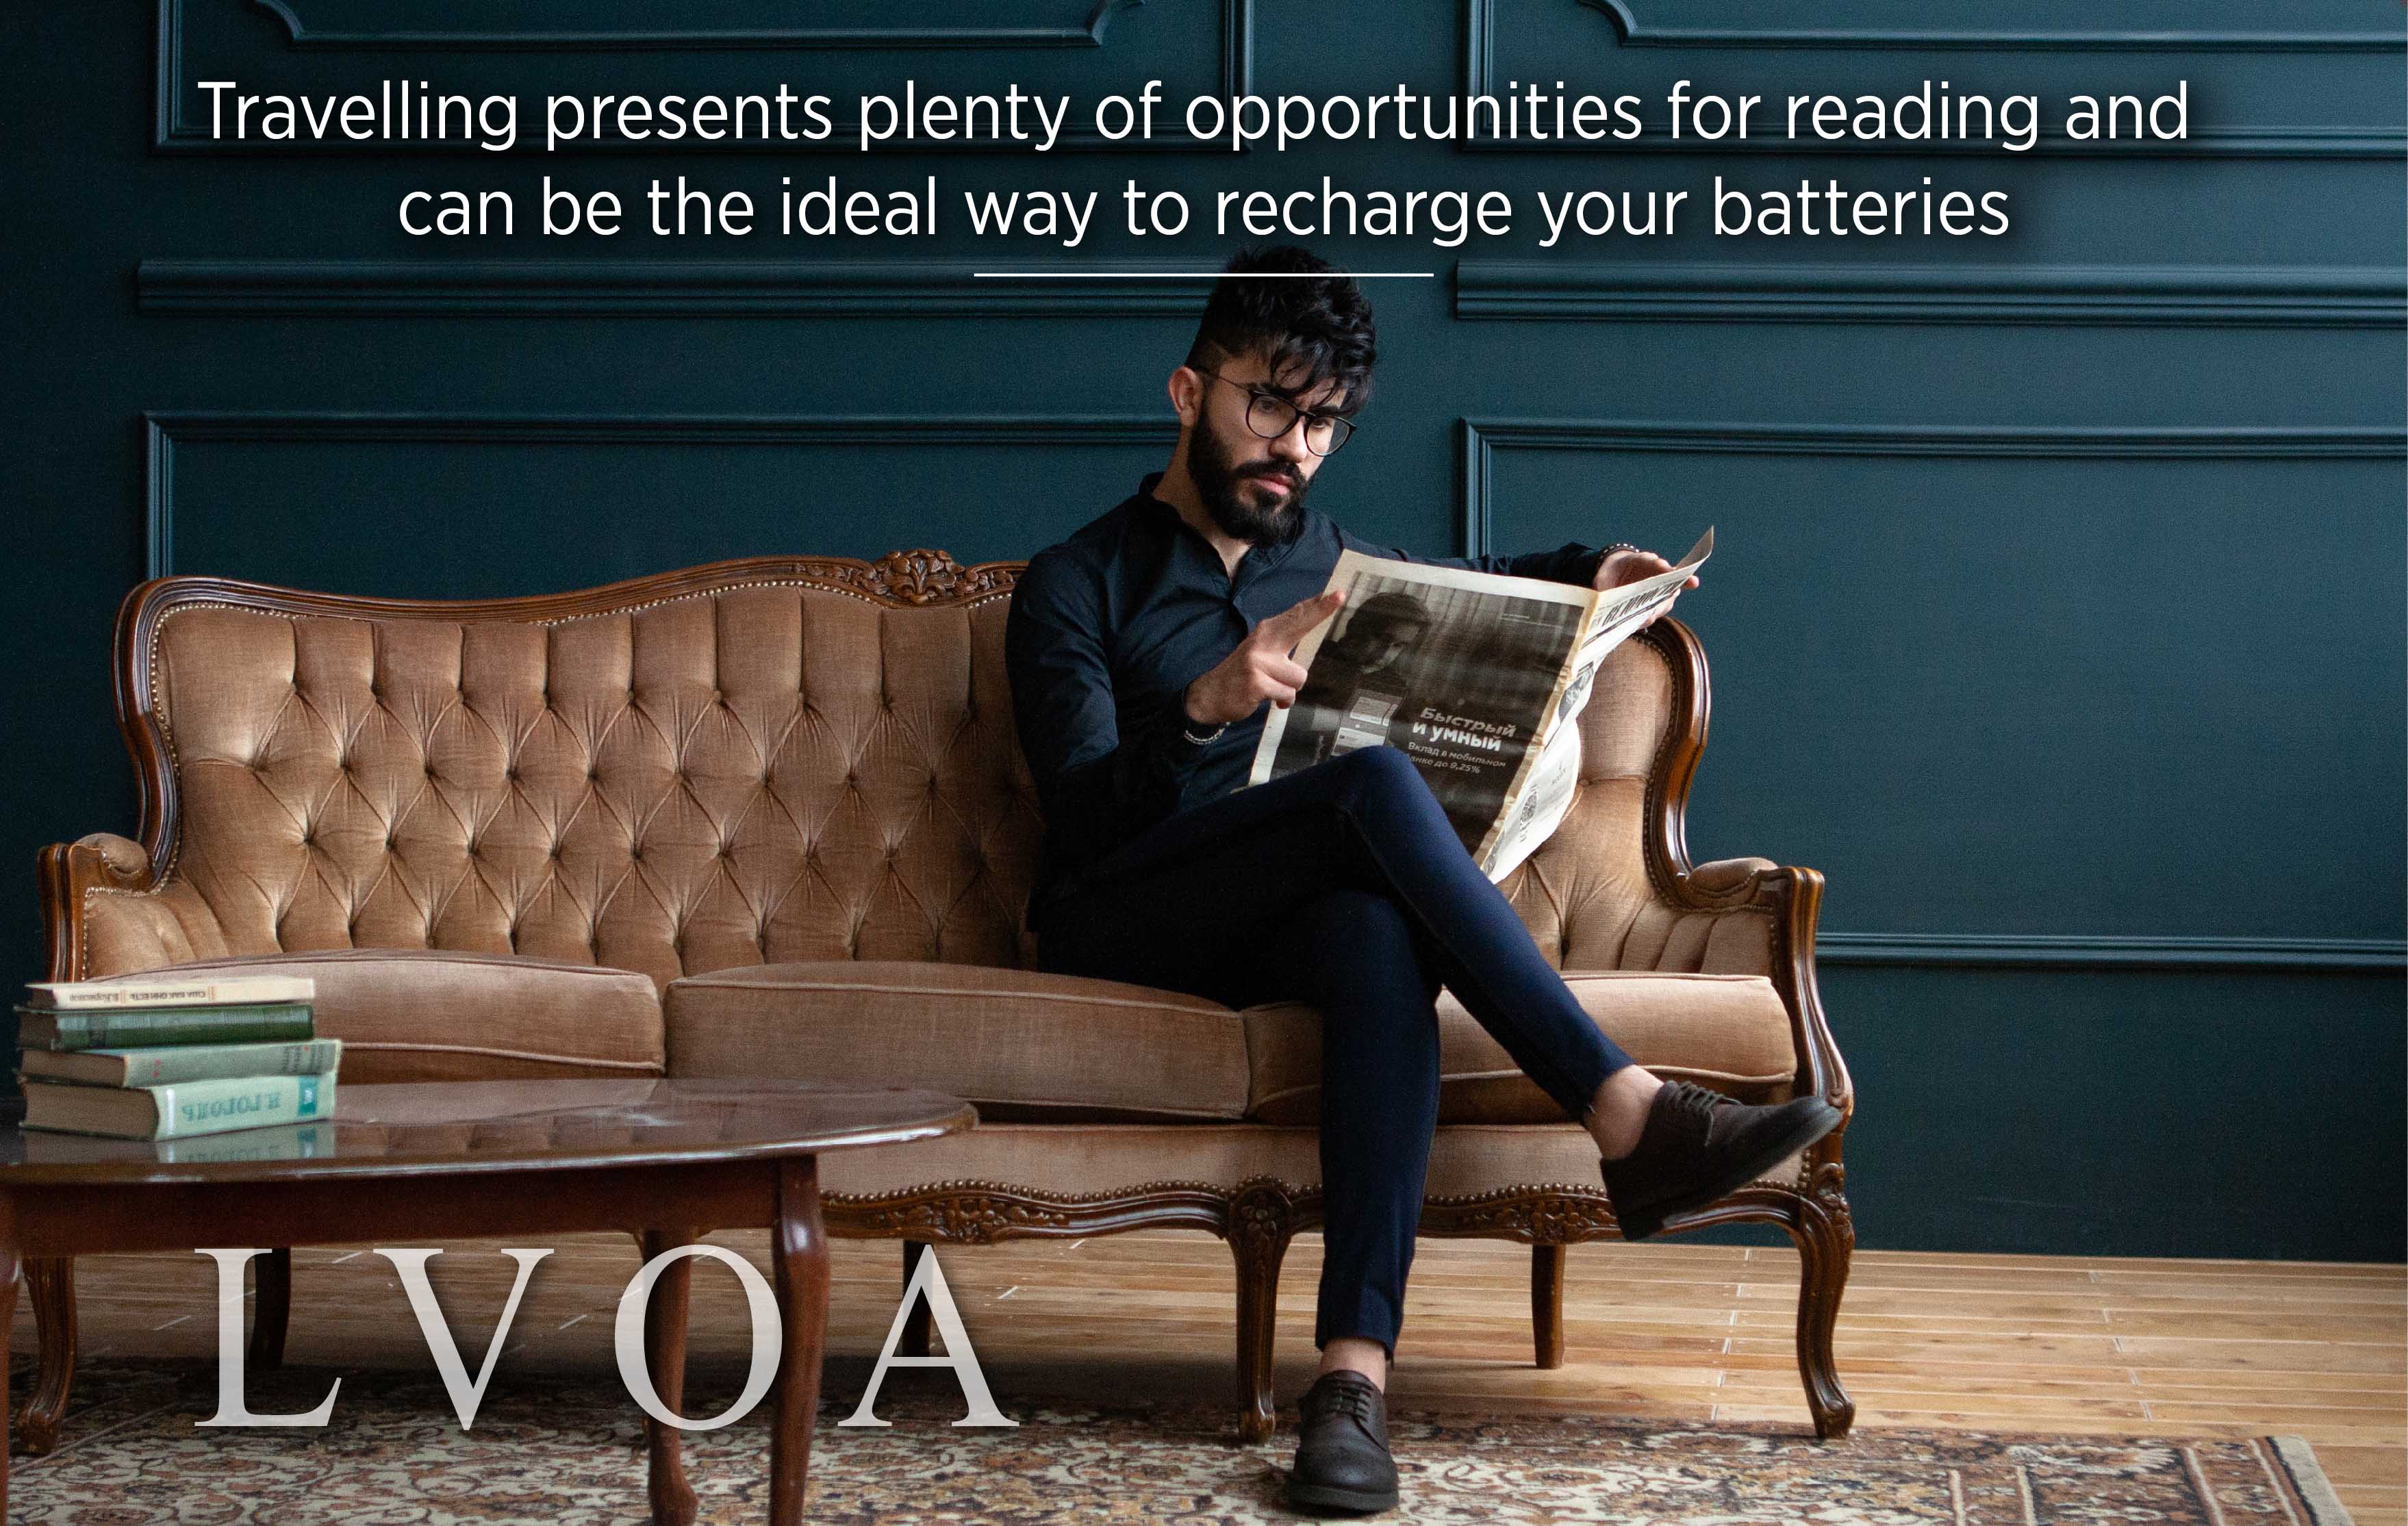 Travelling-presents plenty-of-opportunities-for-reading-and-can-be-the-ideal-way-to-recharge-your-batteries_LVO_Associates